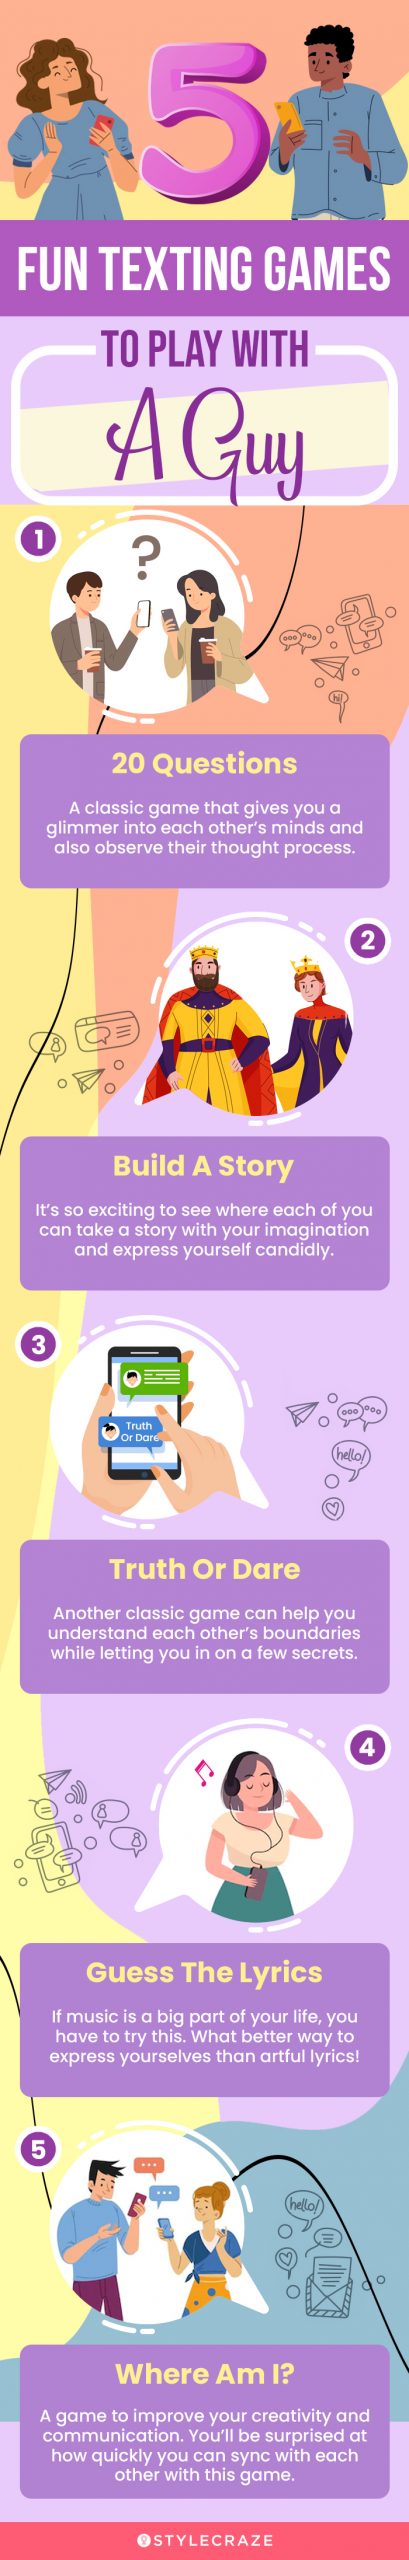 5 fun texting games to play with a guy [infographic]